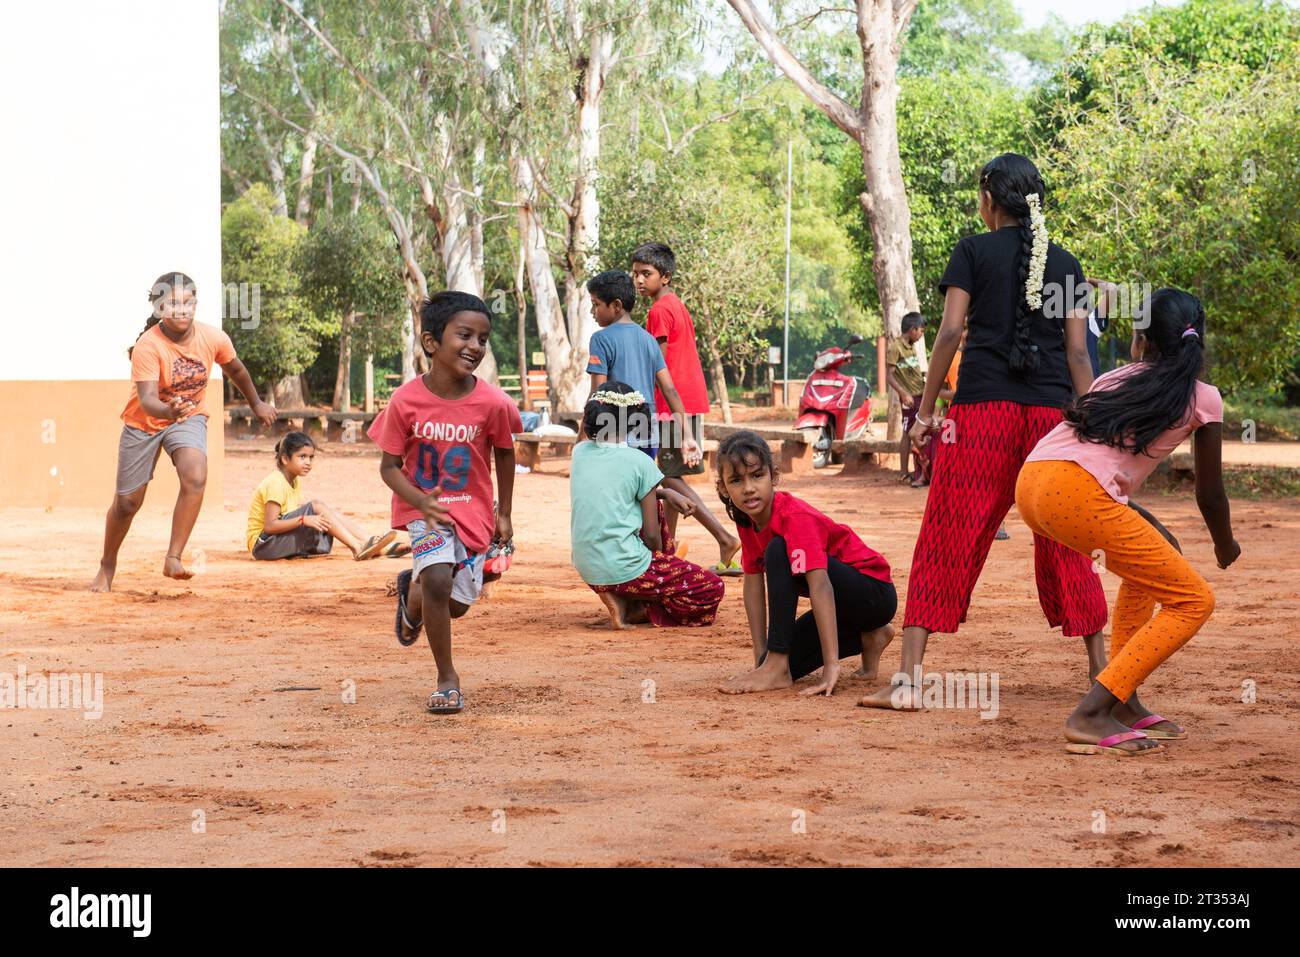 Kho Kho! An interesting and one of the oldest outdoor games with